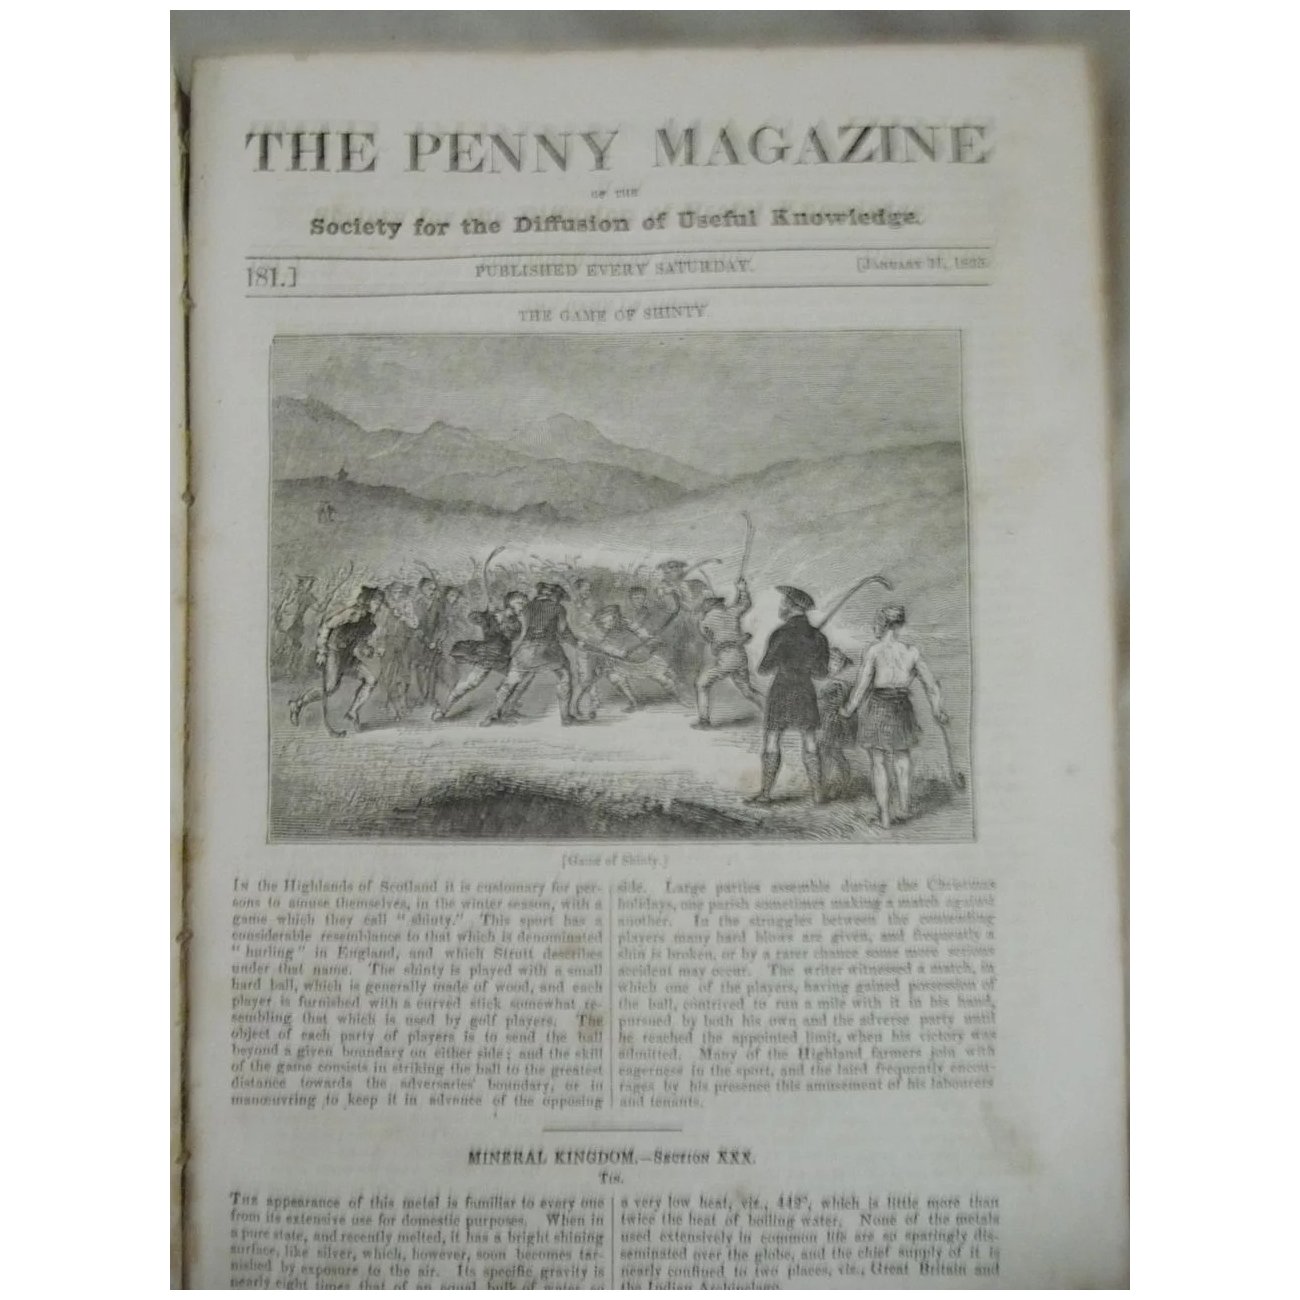 The Penny A Bound Volume of The Penny Magazine of The Society for the Diffusion of Useful Knowledge - 1835